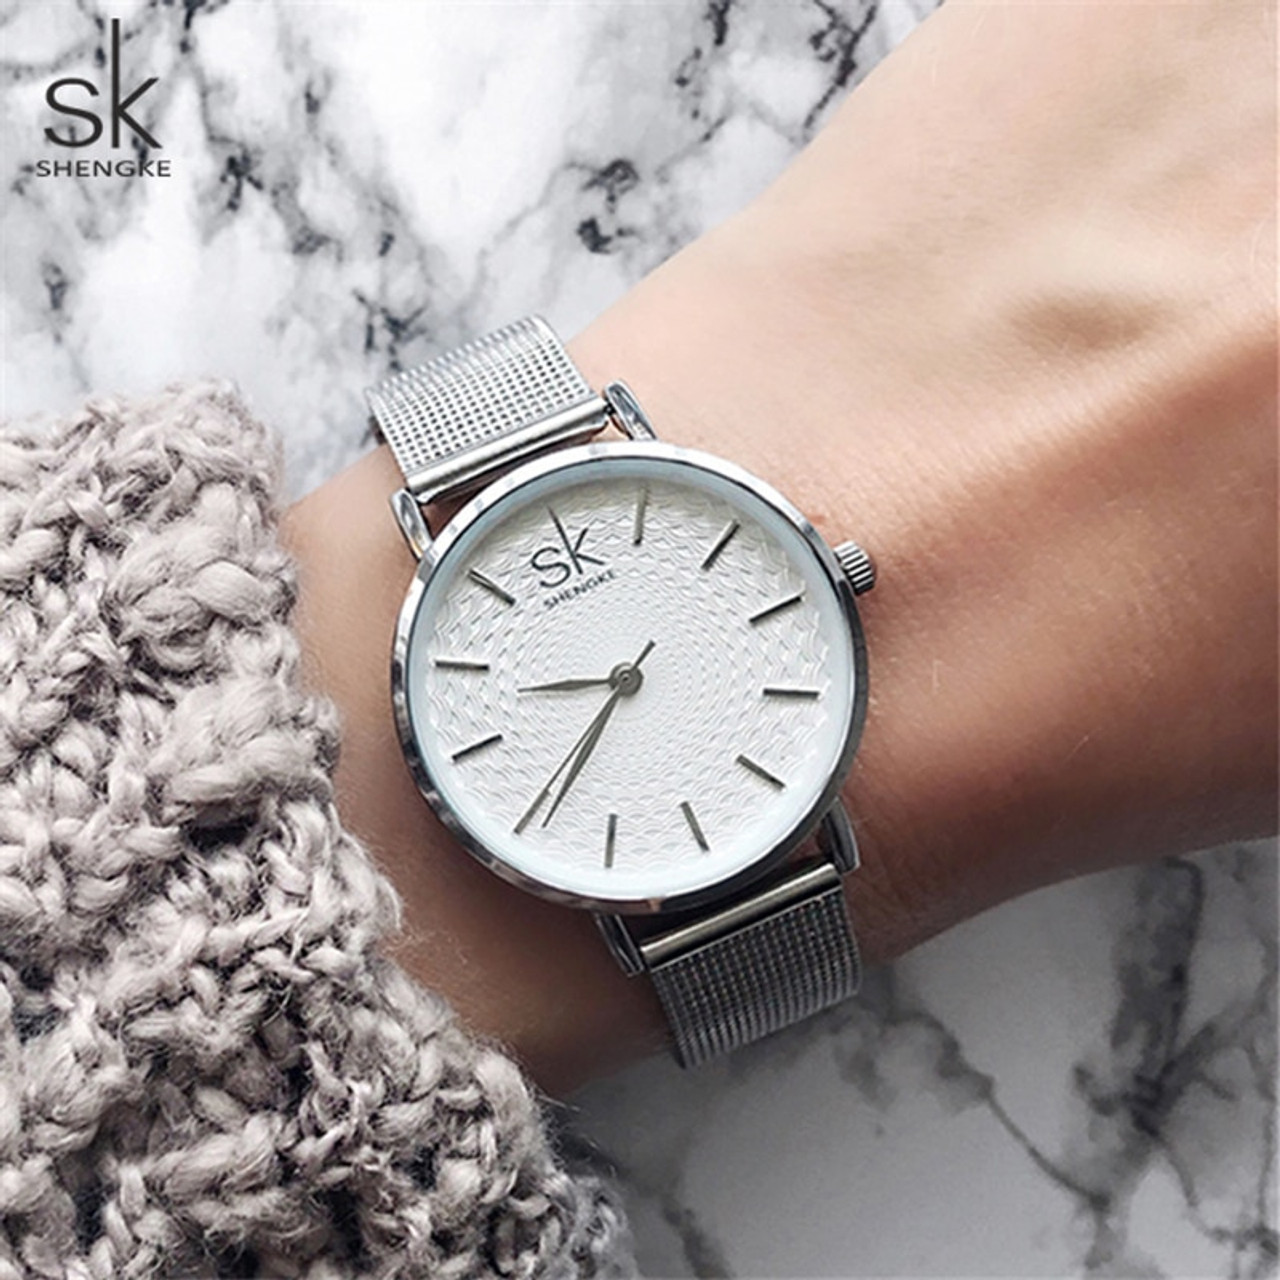 Shengke Official Store - Amazing products with exclusive discounts on  AliExpress